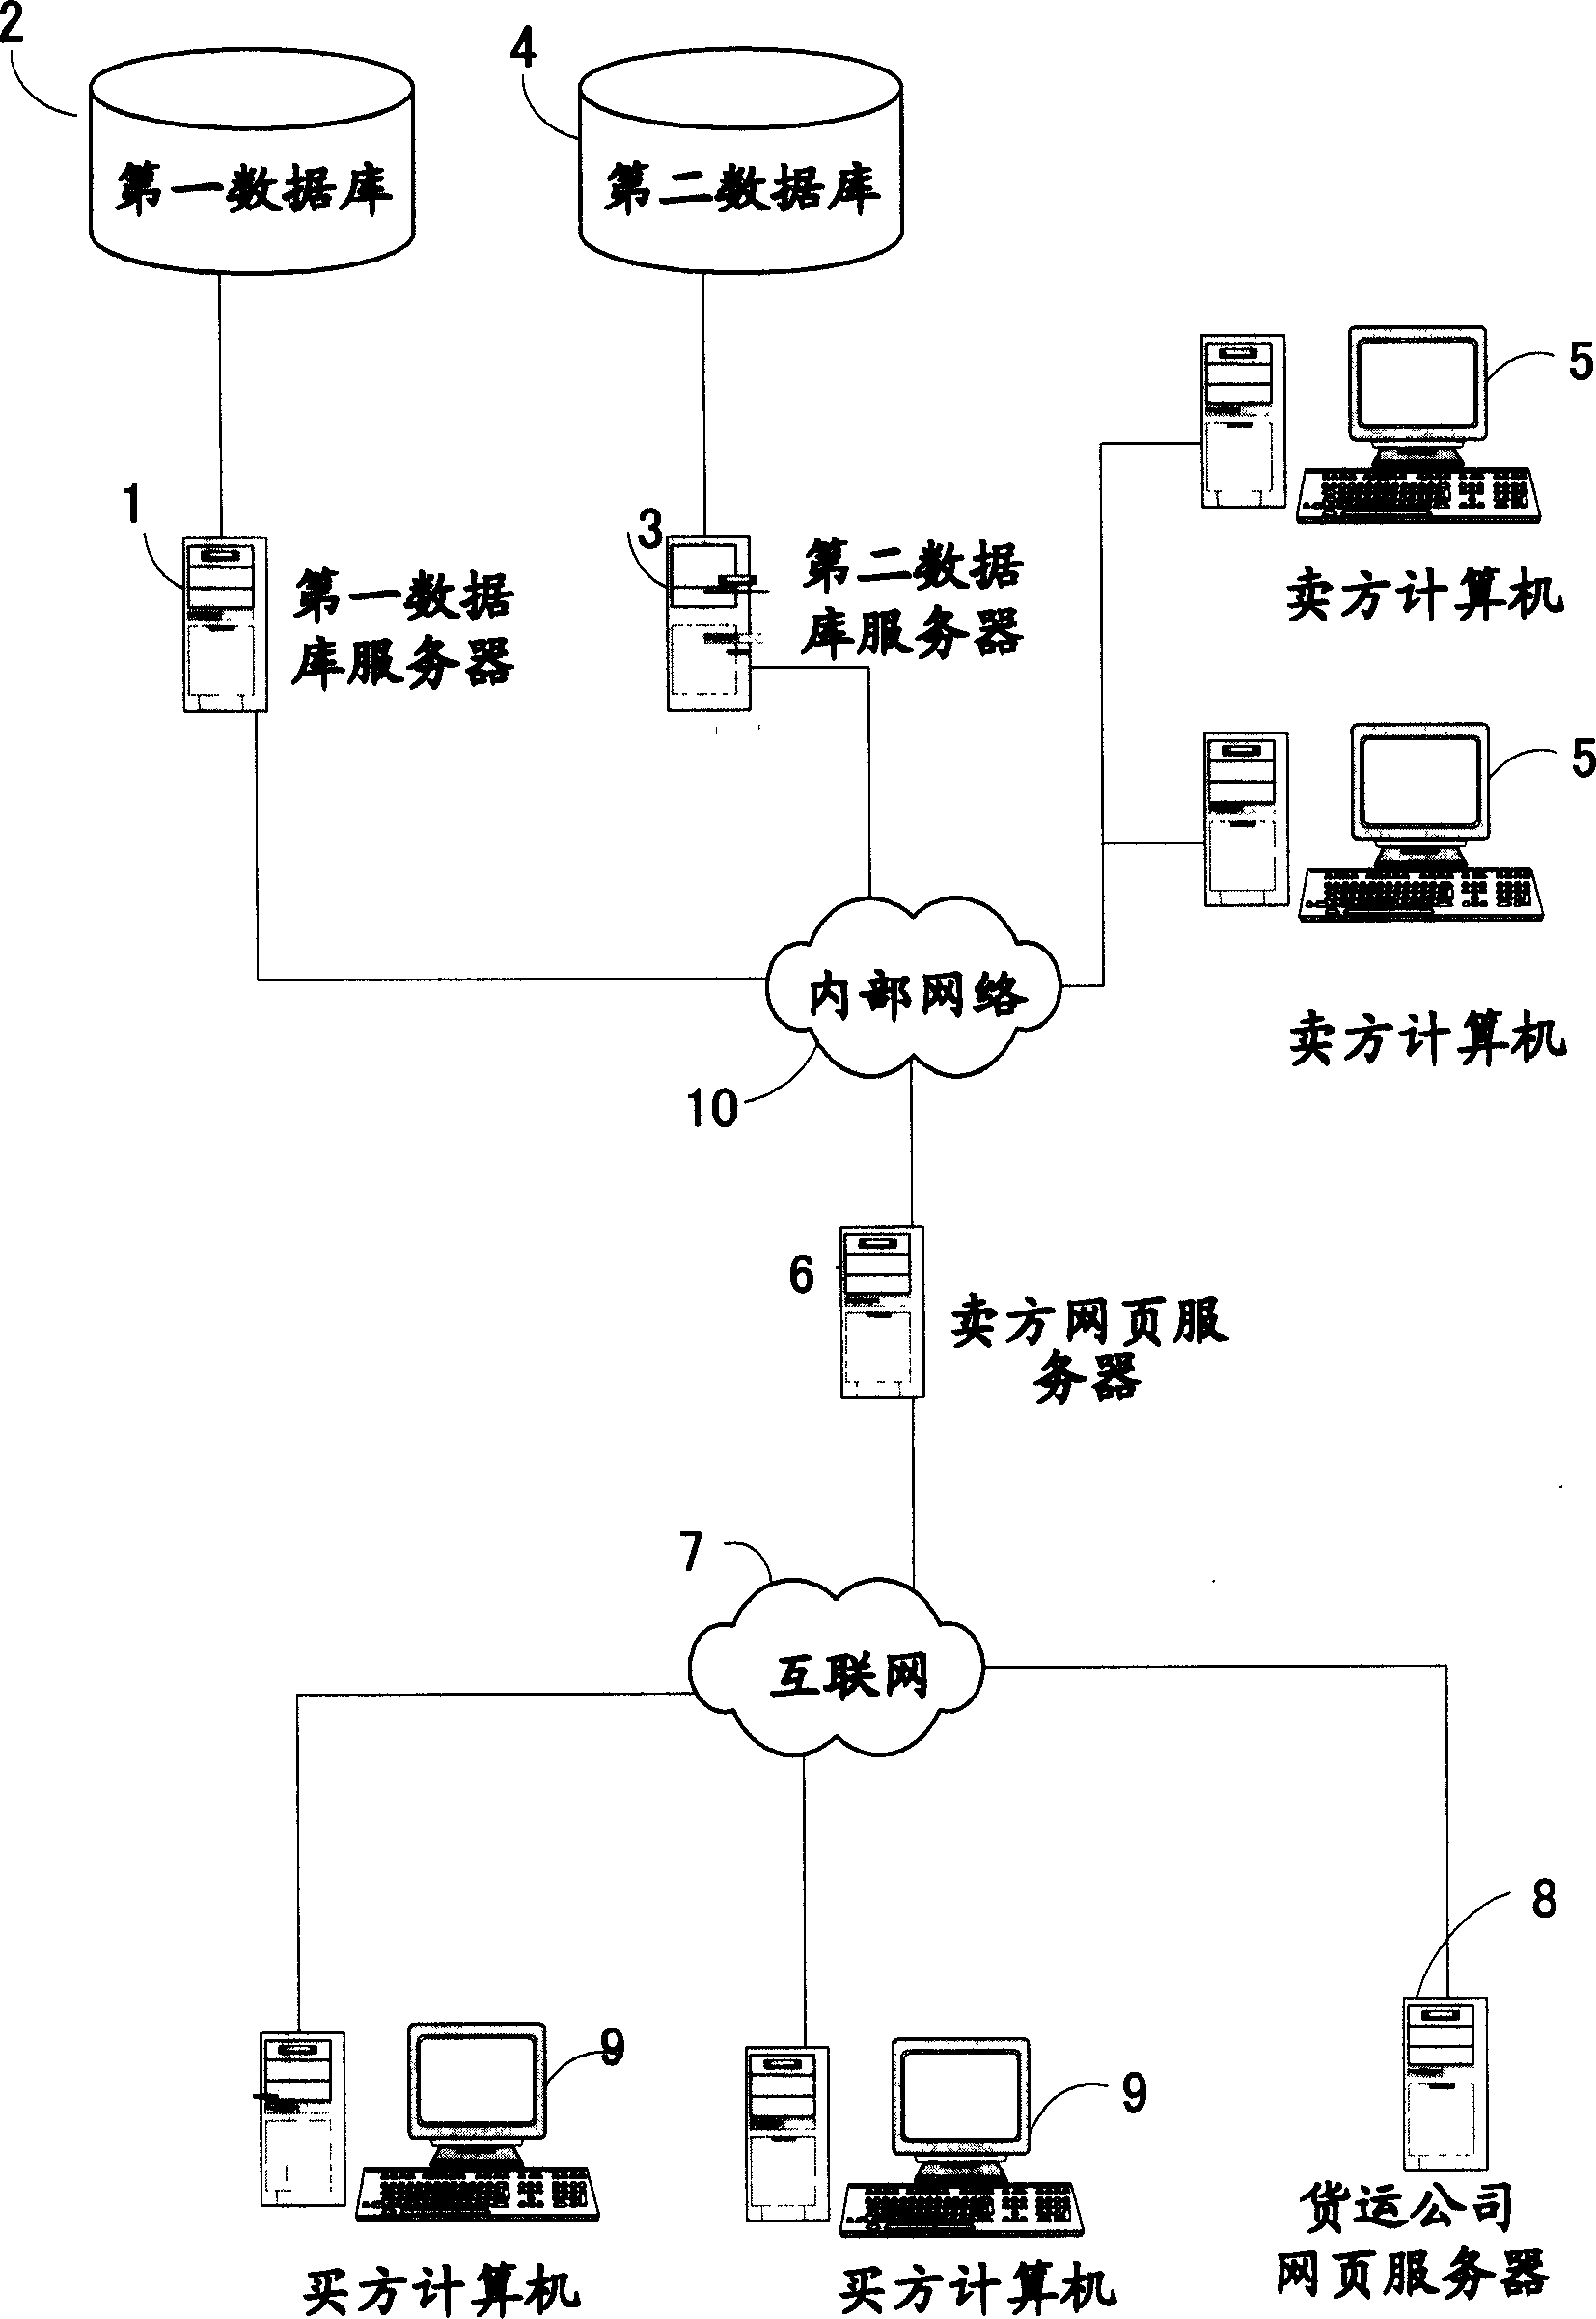 Interactive goods tracking system and method